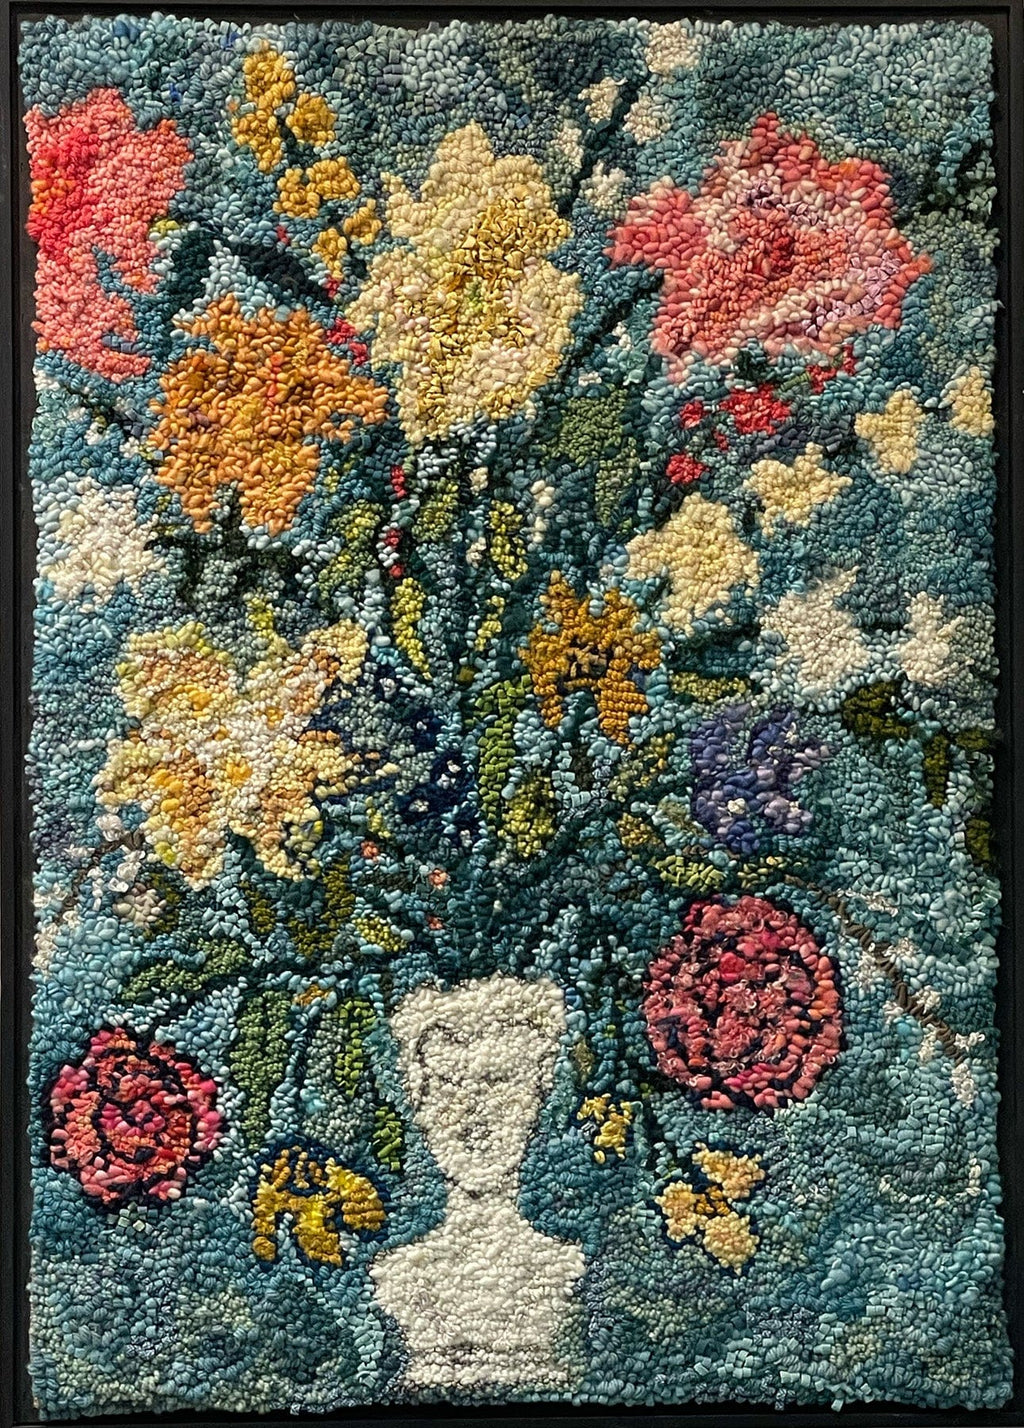 update alt-text with template Table Bouquet 25.5" x 36" Framed SOLD-Deanne Fitzpatrick Rug Hooking Studio-Rug Hooking Kit -Rug Hooking Pattern -Rug Hooking -Deanne Fitzpatrick Rug Hooking Studio -Is rug hooking the same as punch needle?